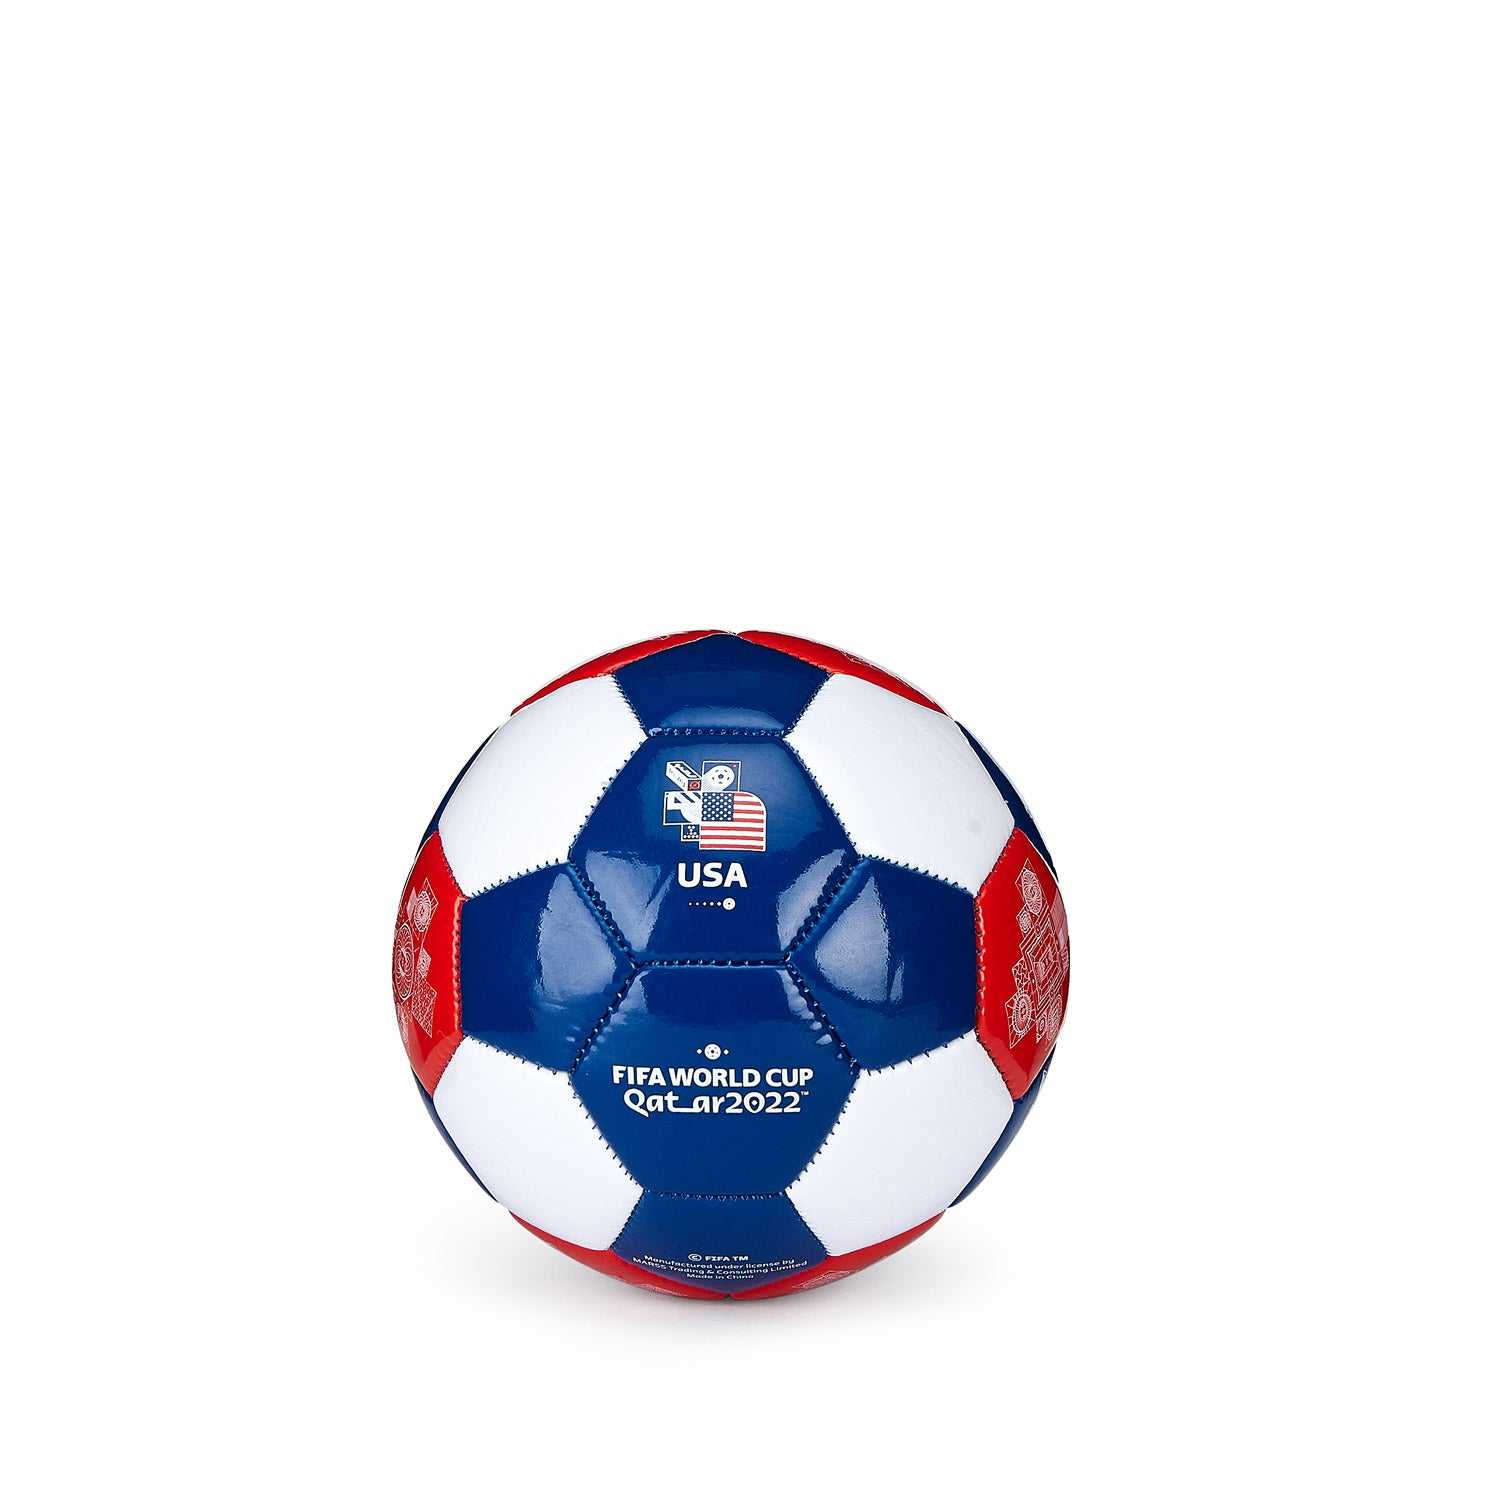 World Cup 2022 USA Licensed Ball Size 2